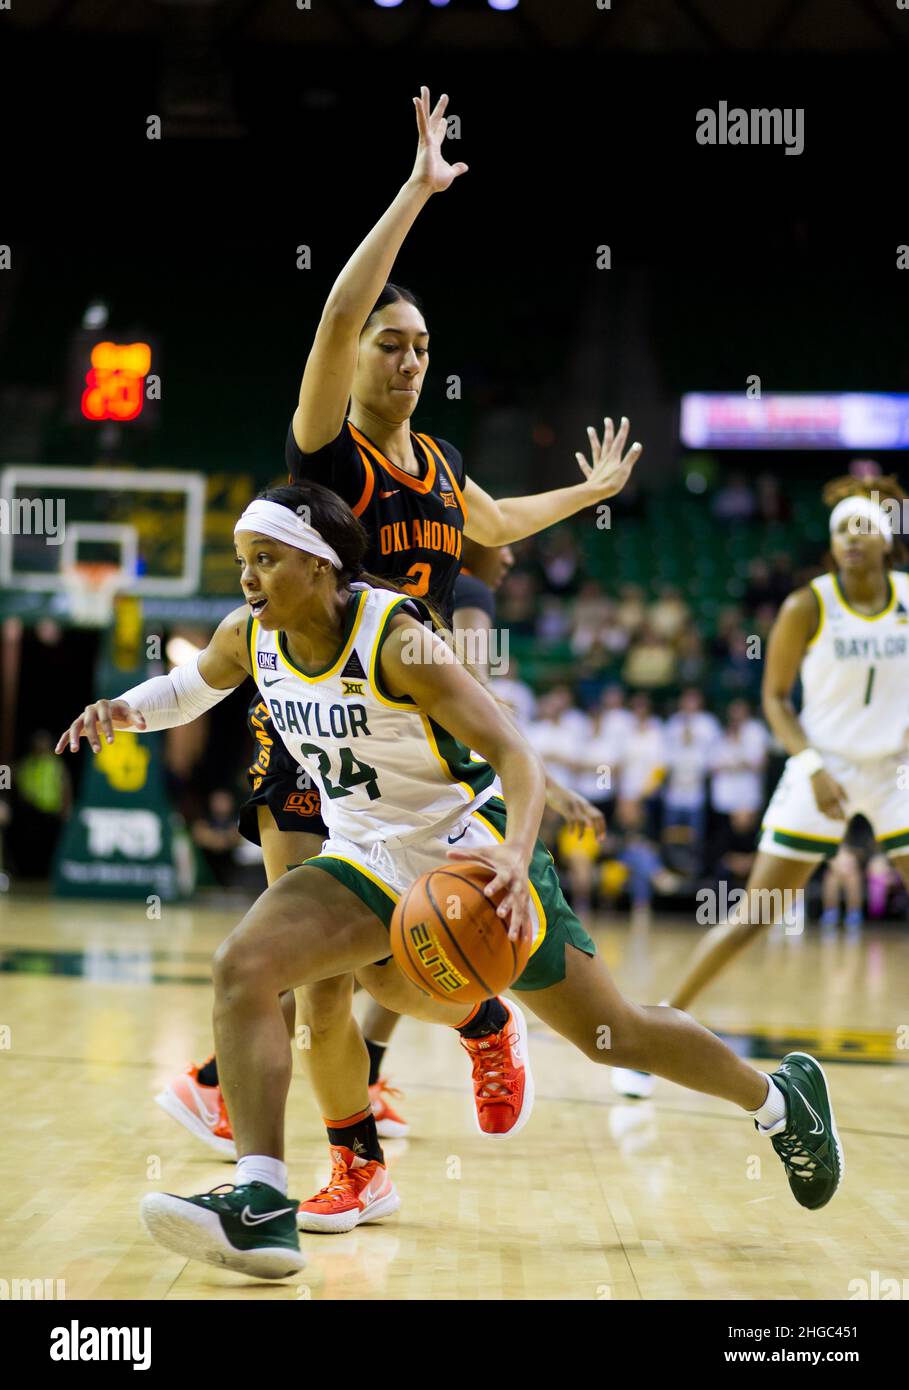 Waco, Texas, USA. 19th Jan, 2022. Baylor Lady Bears guard Sarah Andrews (24) drives to the basket against Oklahoma State Cowgirls guard Micah Dennis (3) during the 1st quarter of the NCAA Basketball game between the Oklahoma State Cowgirls and Baylor Lady Bears at Ferrell Center in Waco, Texas. Matthew Lynch/CSM/Alamy Live News Stock Photo